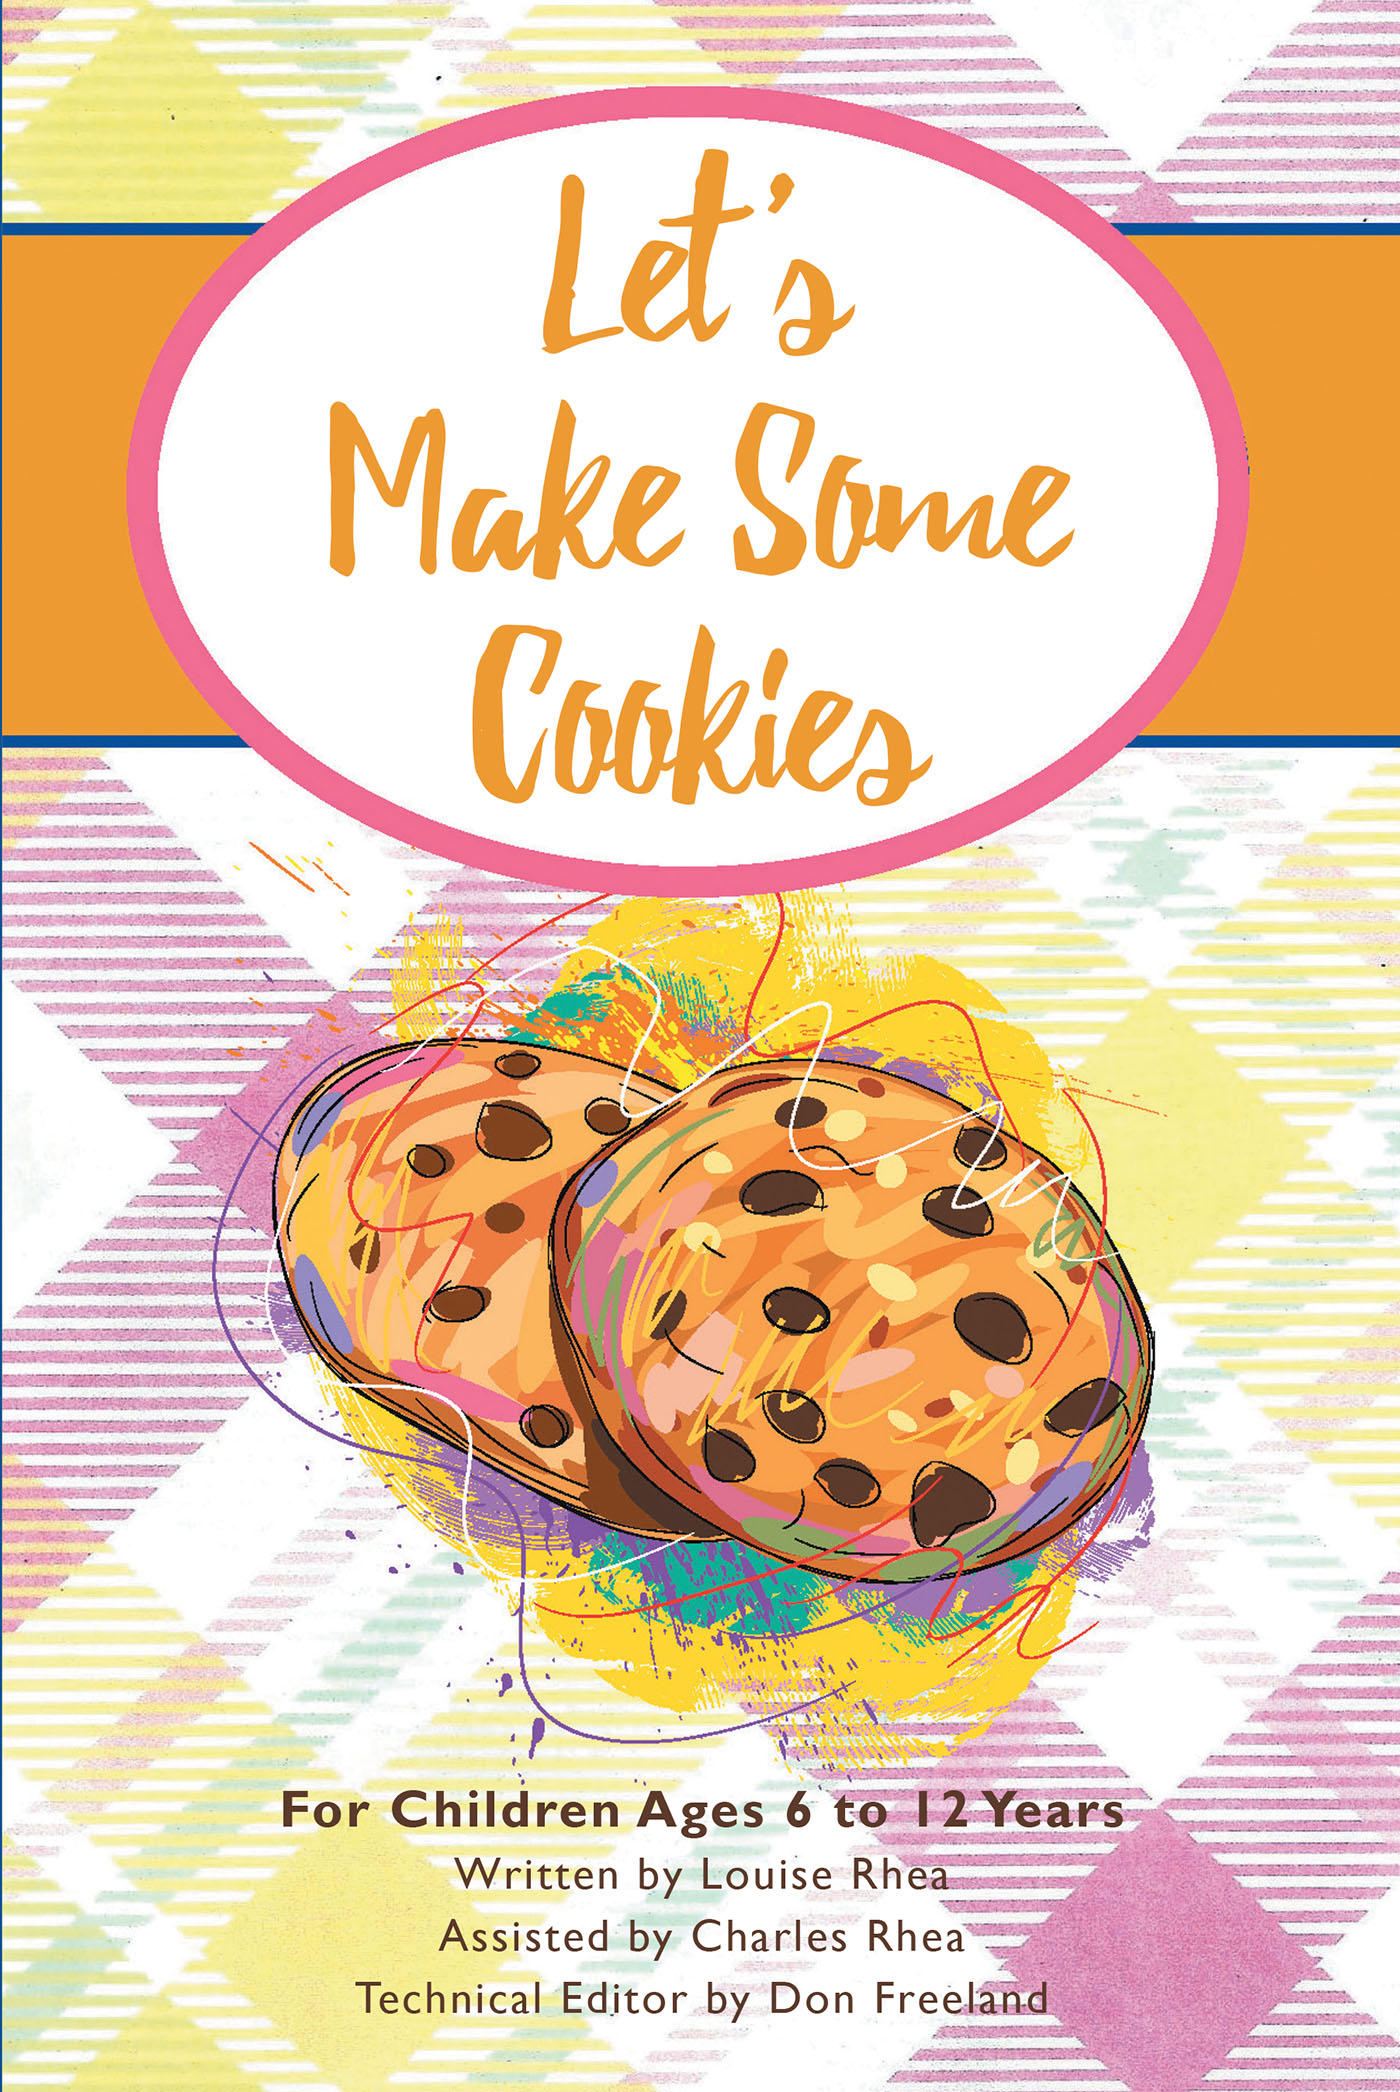 Let's Make Some Cookies Cover Image